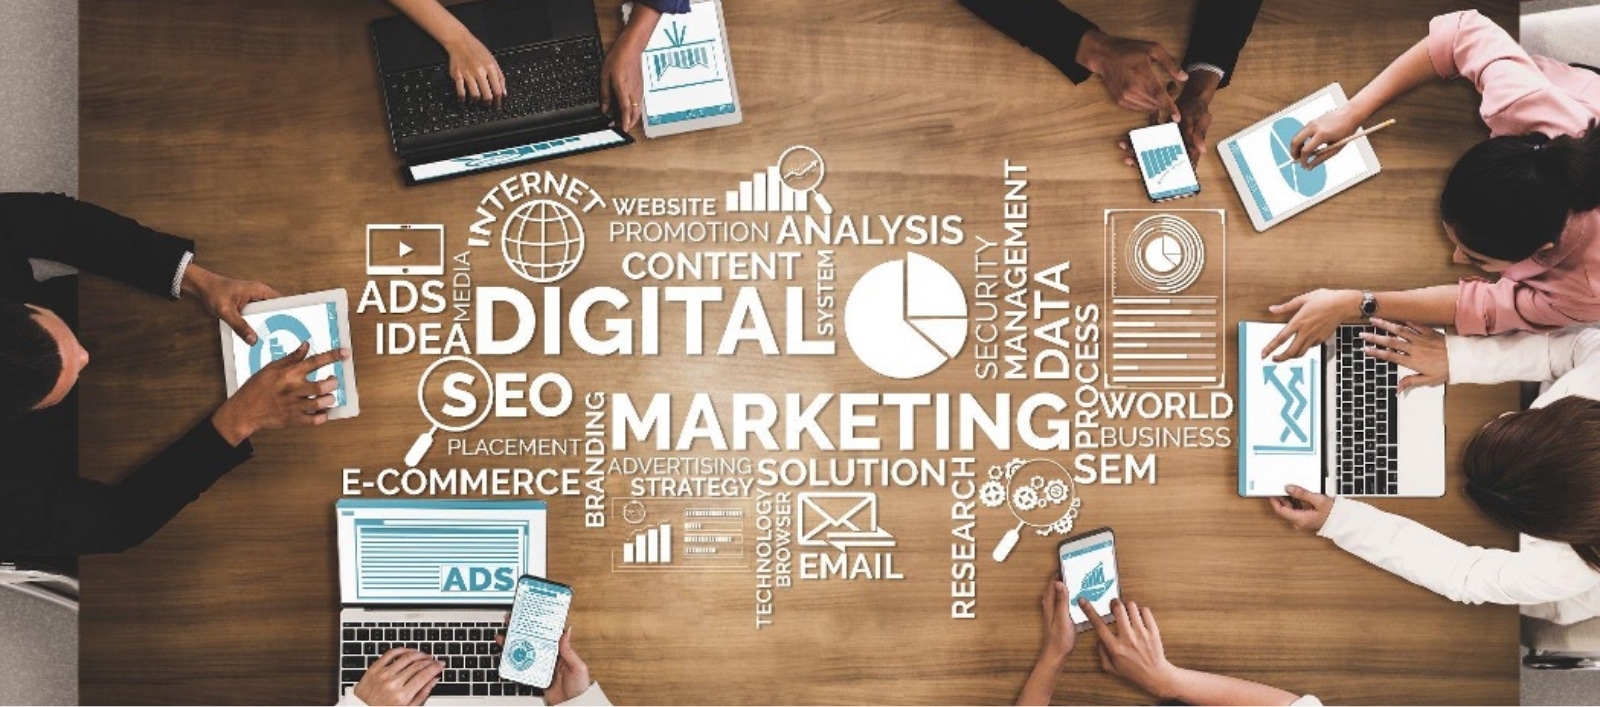 The importance of digital marketing for business owners